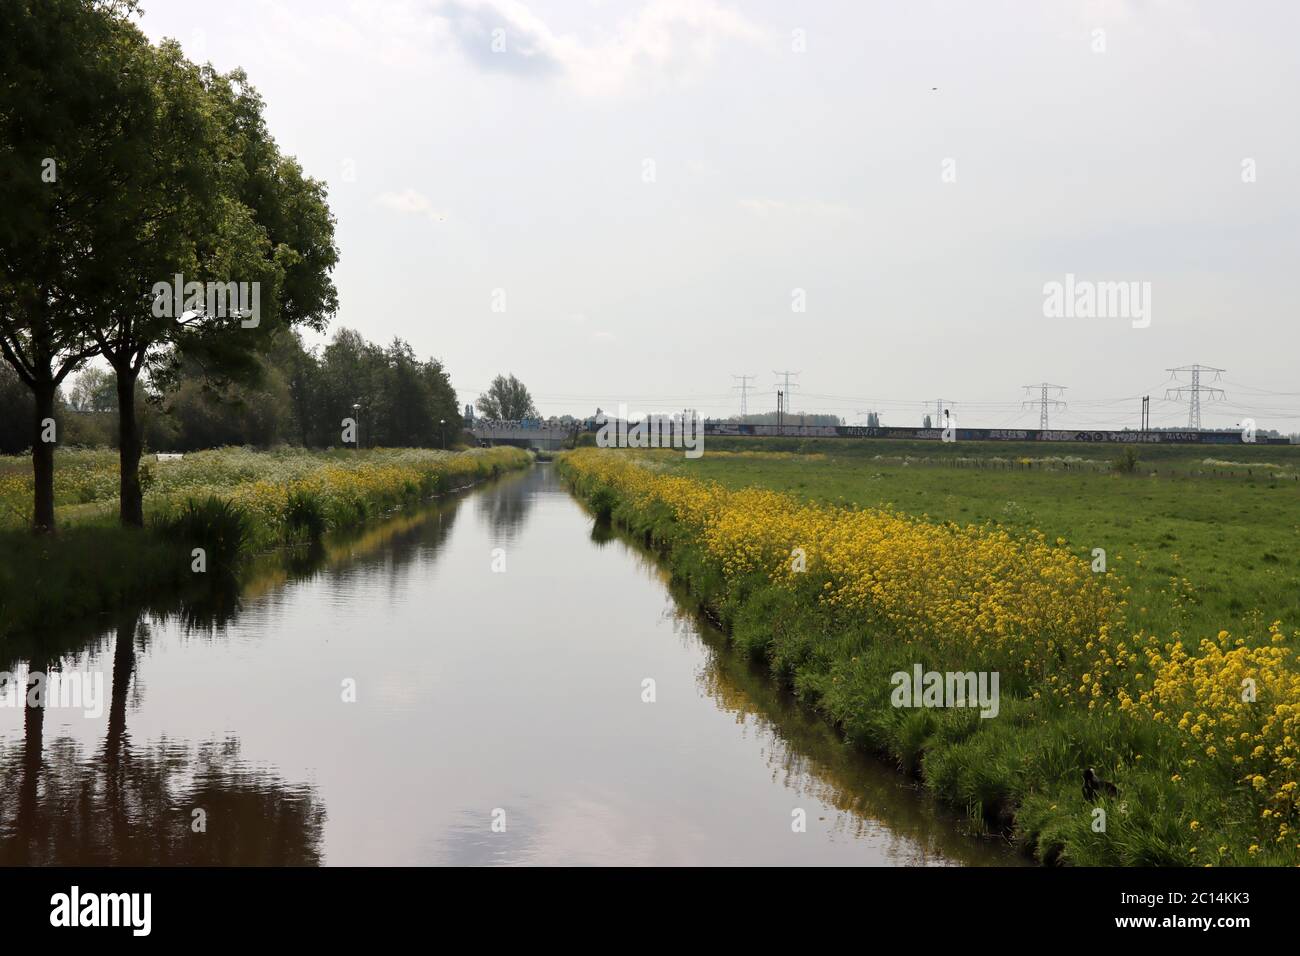 Yellow rapeseed flowers in the polders in provence Zuid Holland in the Netherlands Stock Photo